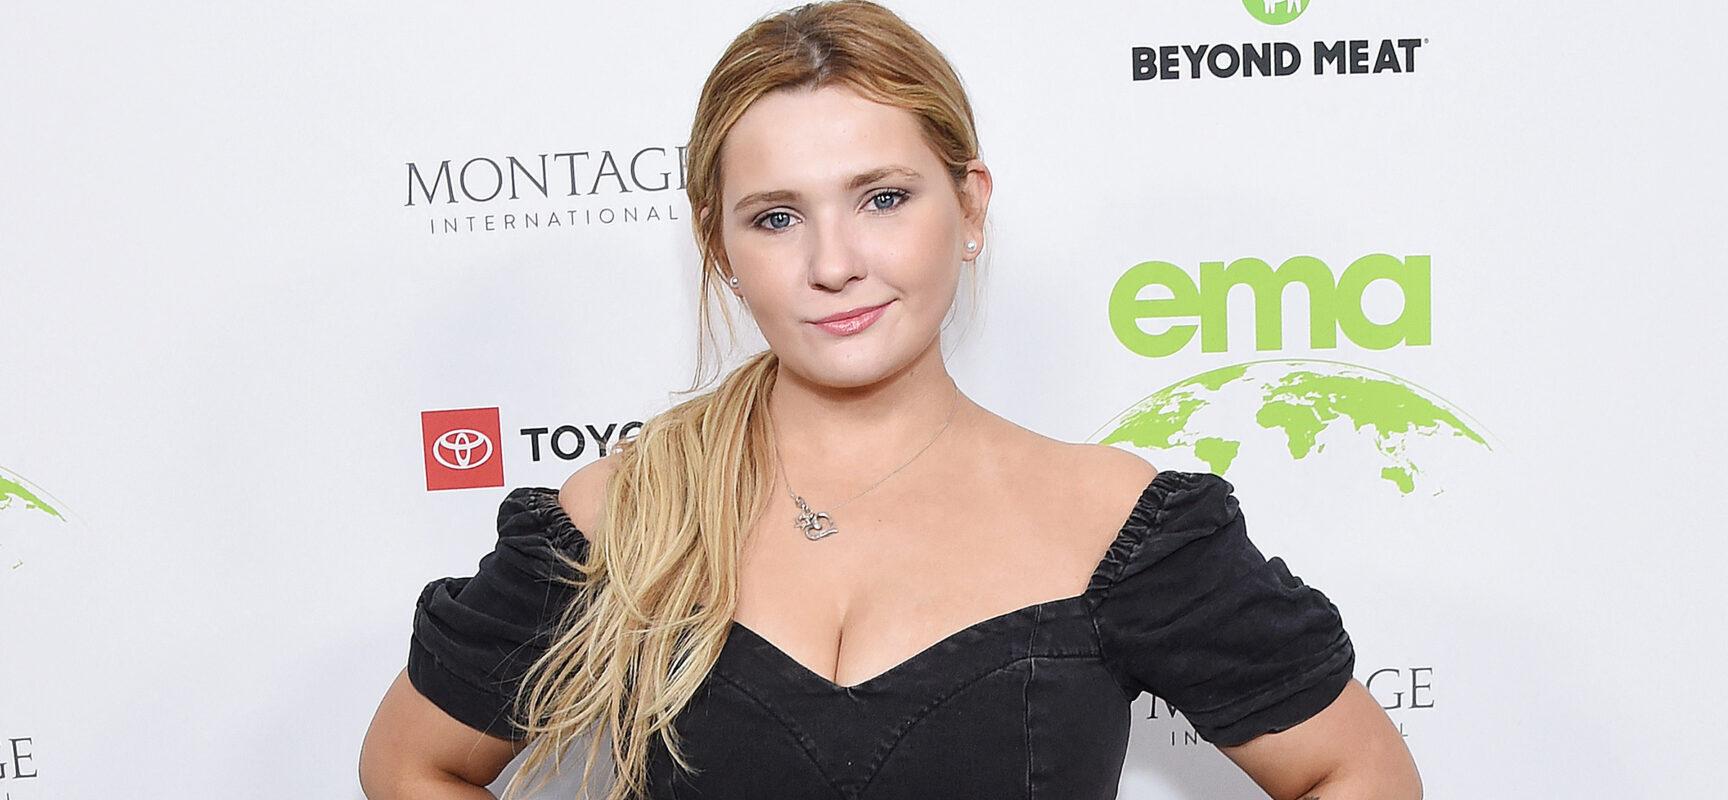 Abigail Breslin Accuses Aaron Eckhart Of ‘Aggressive, Demeaning’ Behavior On Set Of ‘Classified’